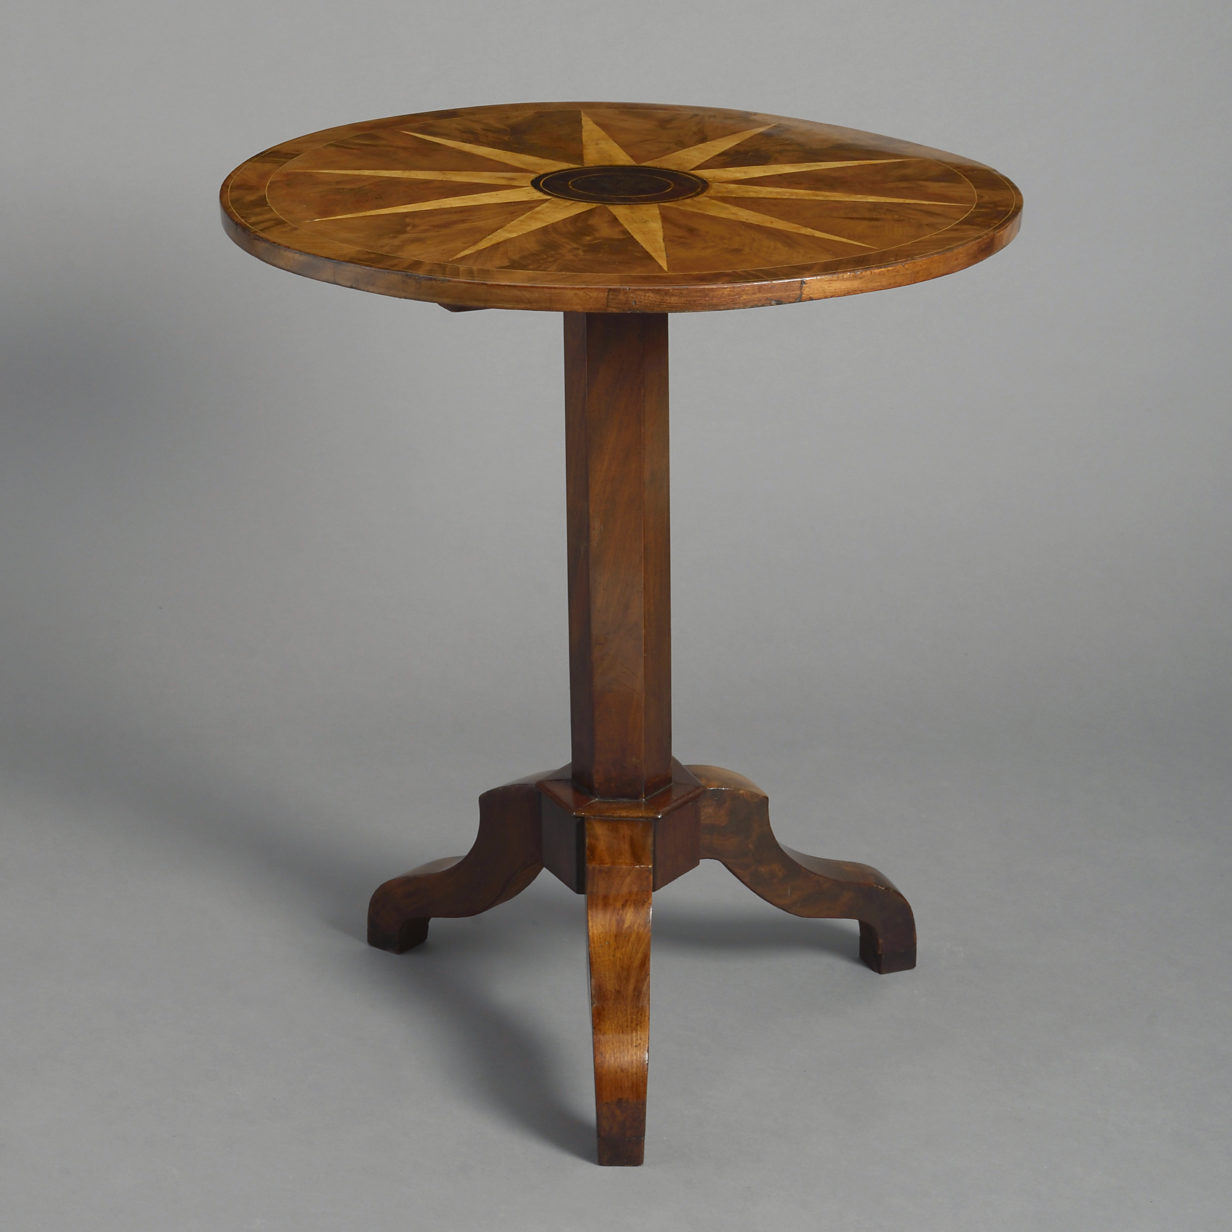 An early 19th century mahogany occasional table